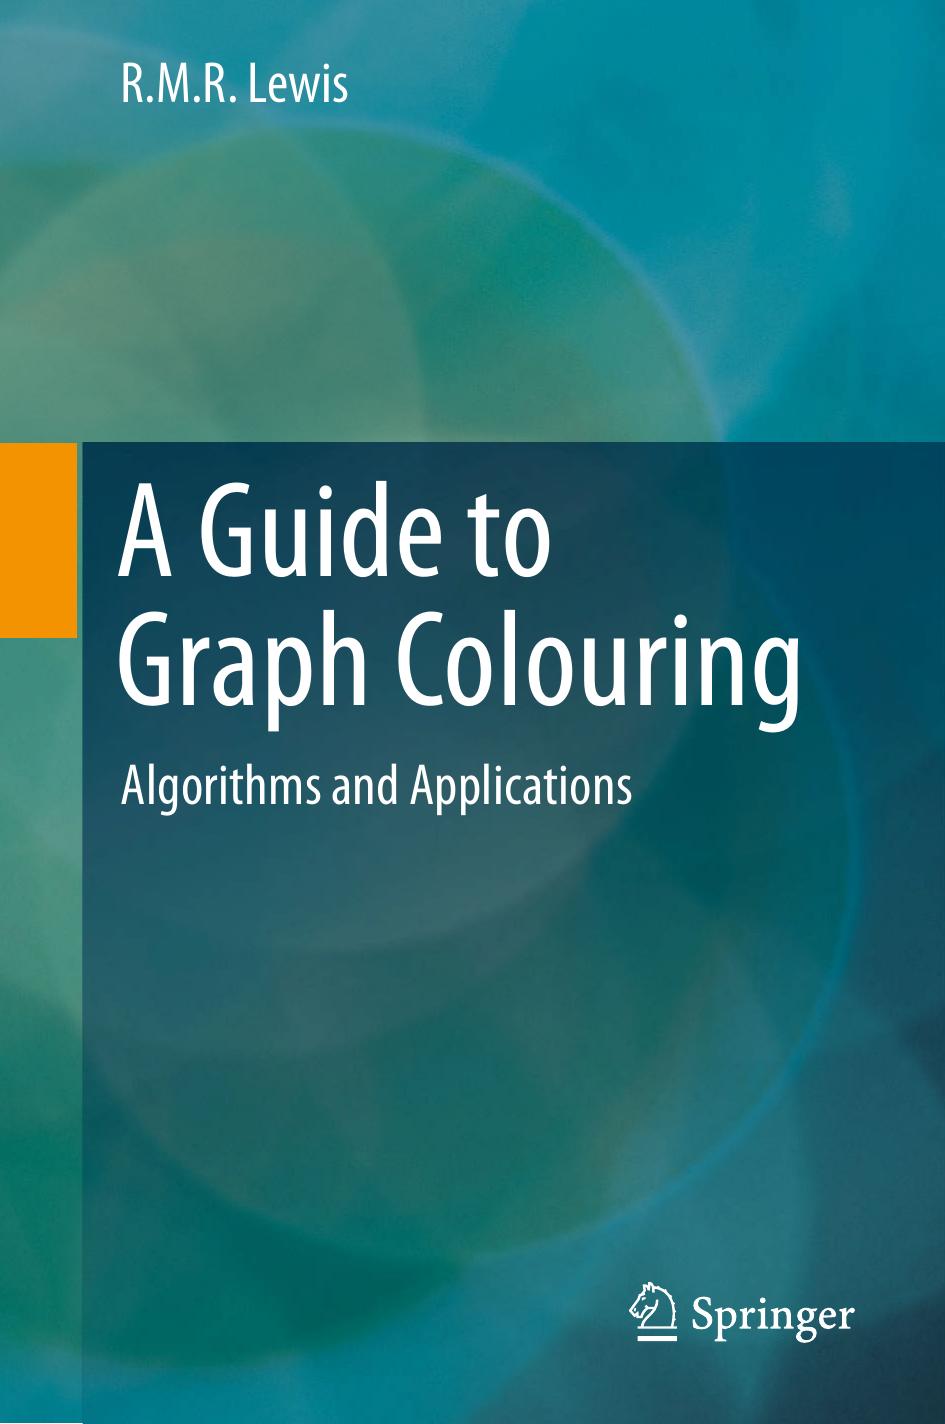 A Guide to Graph Colouring: Algorithms and Applications